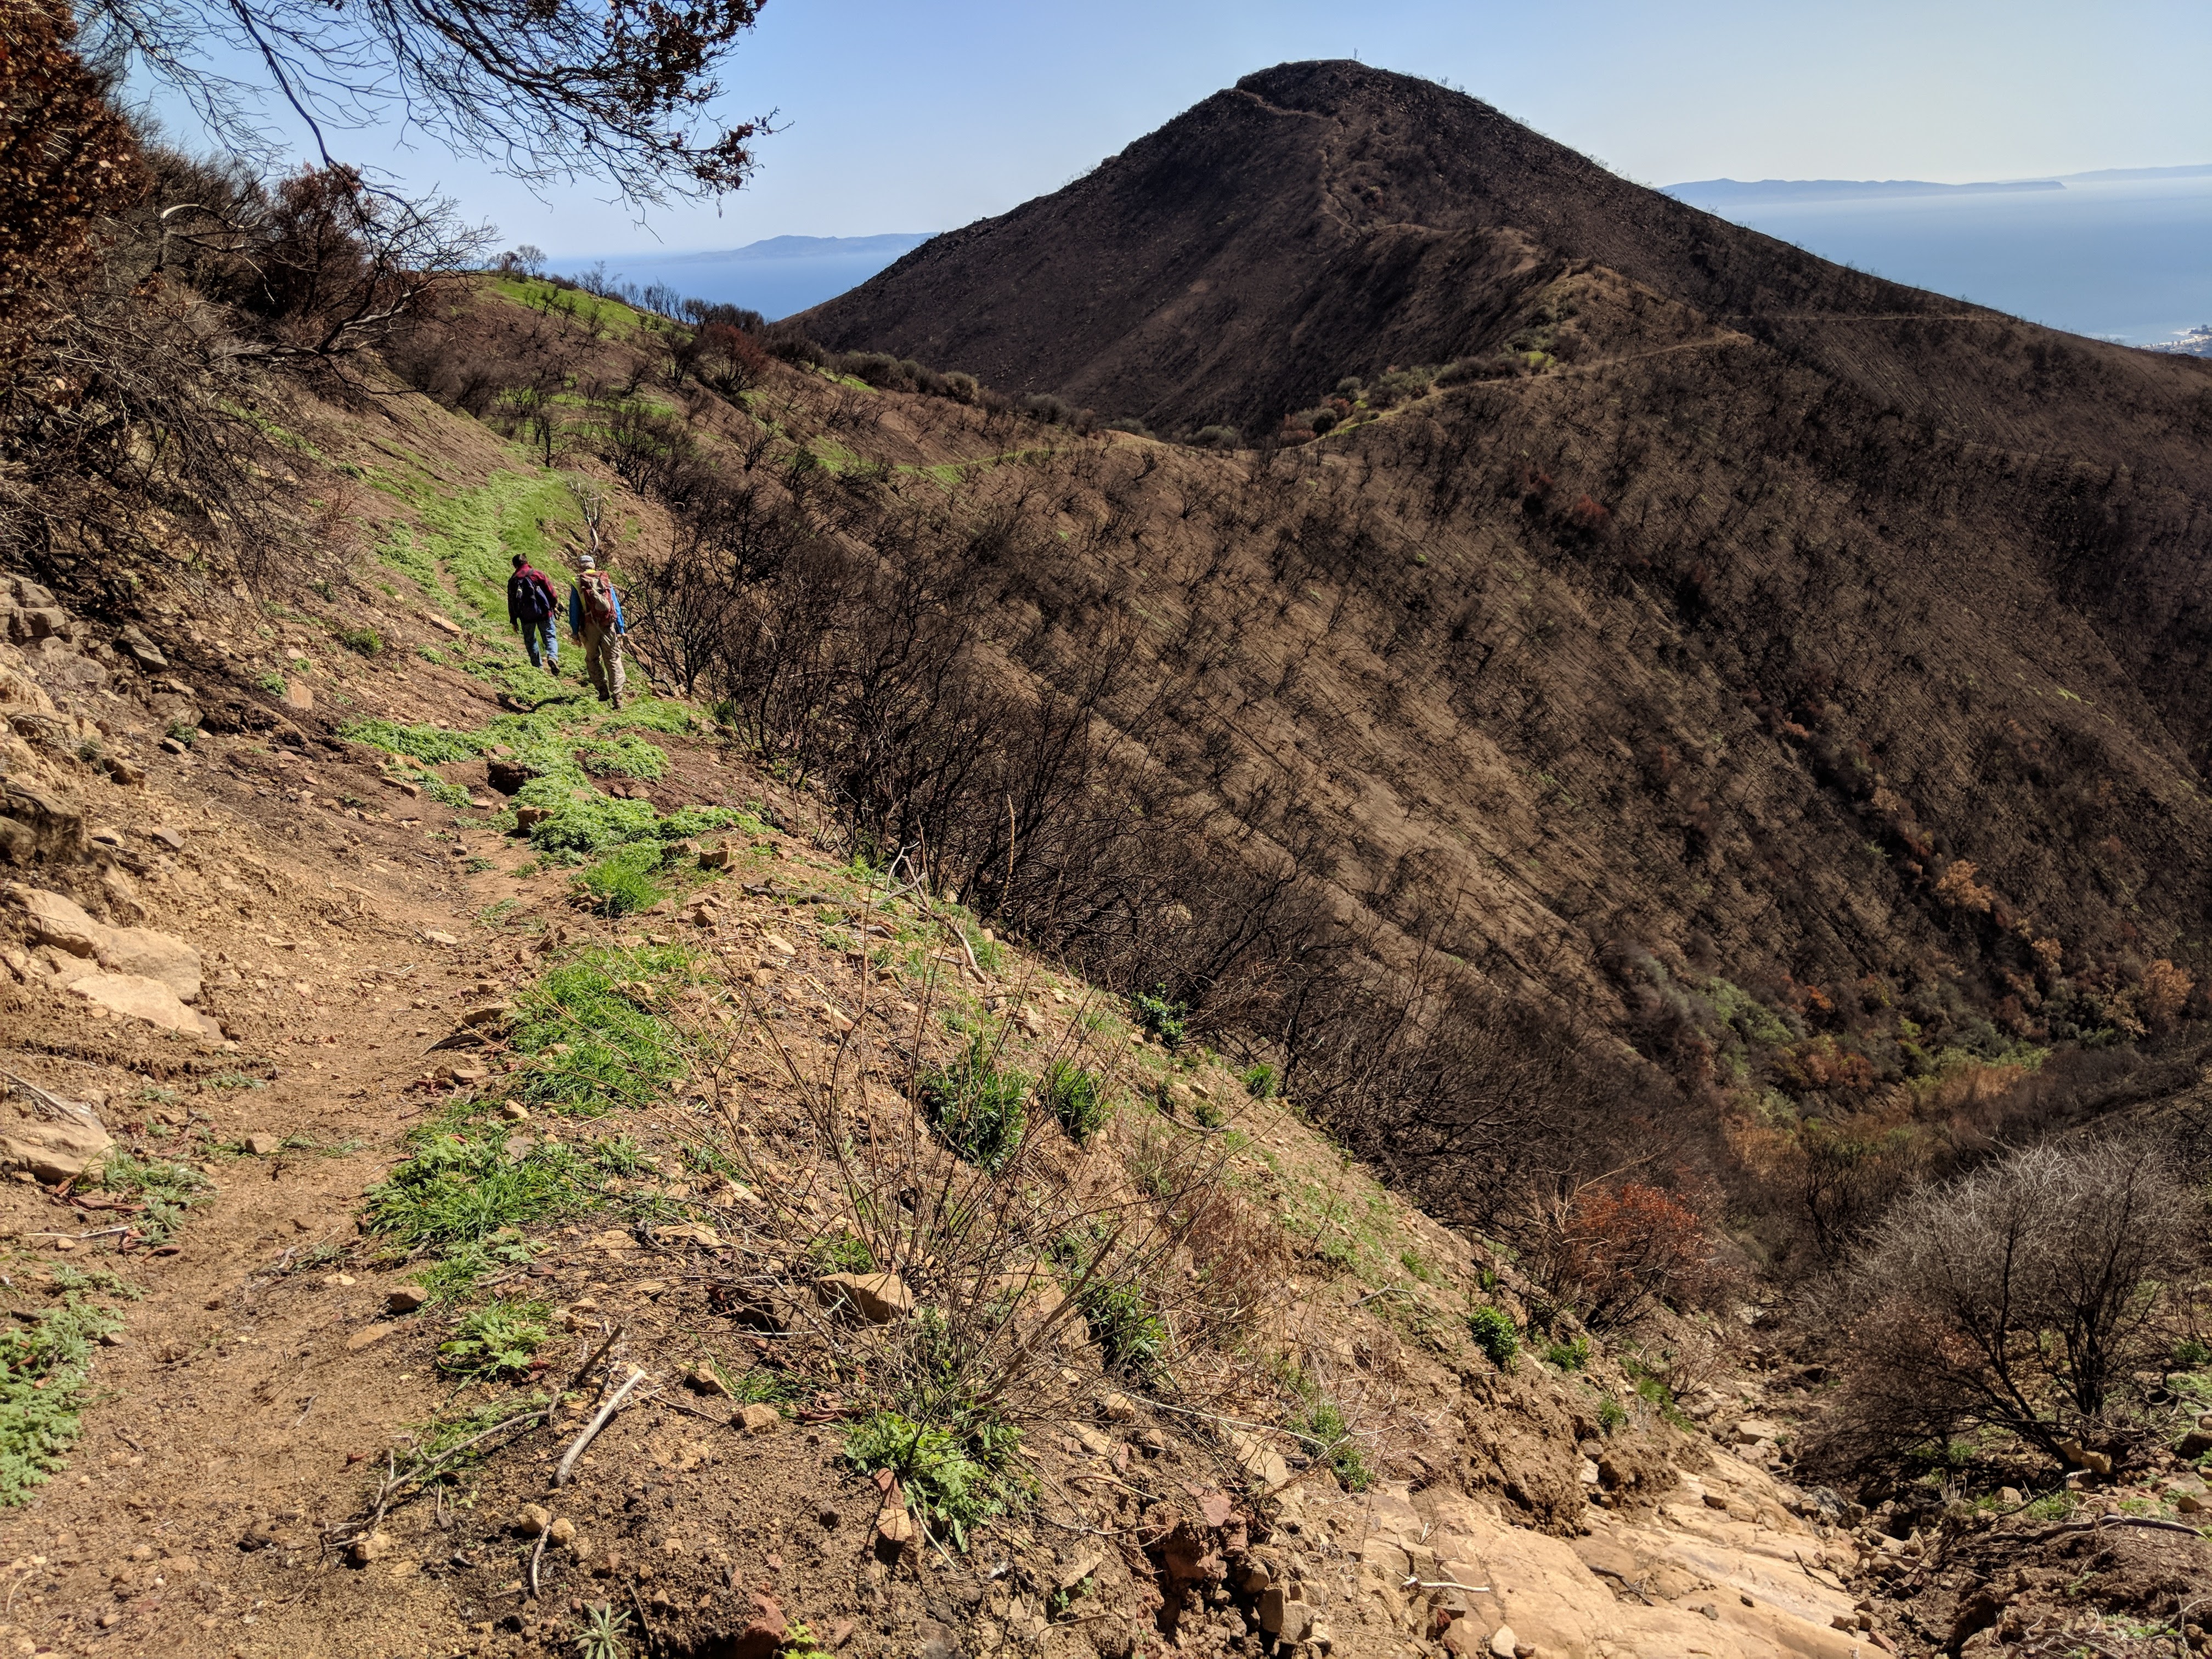 A few people walk along a mountainside as some vegetation regrows after a wildfire